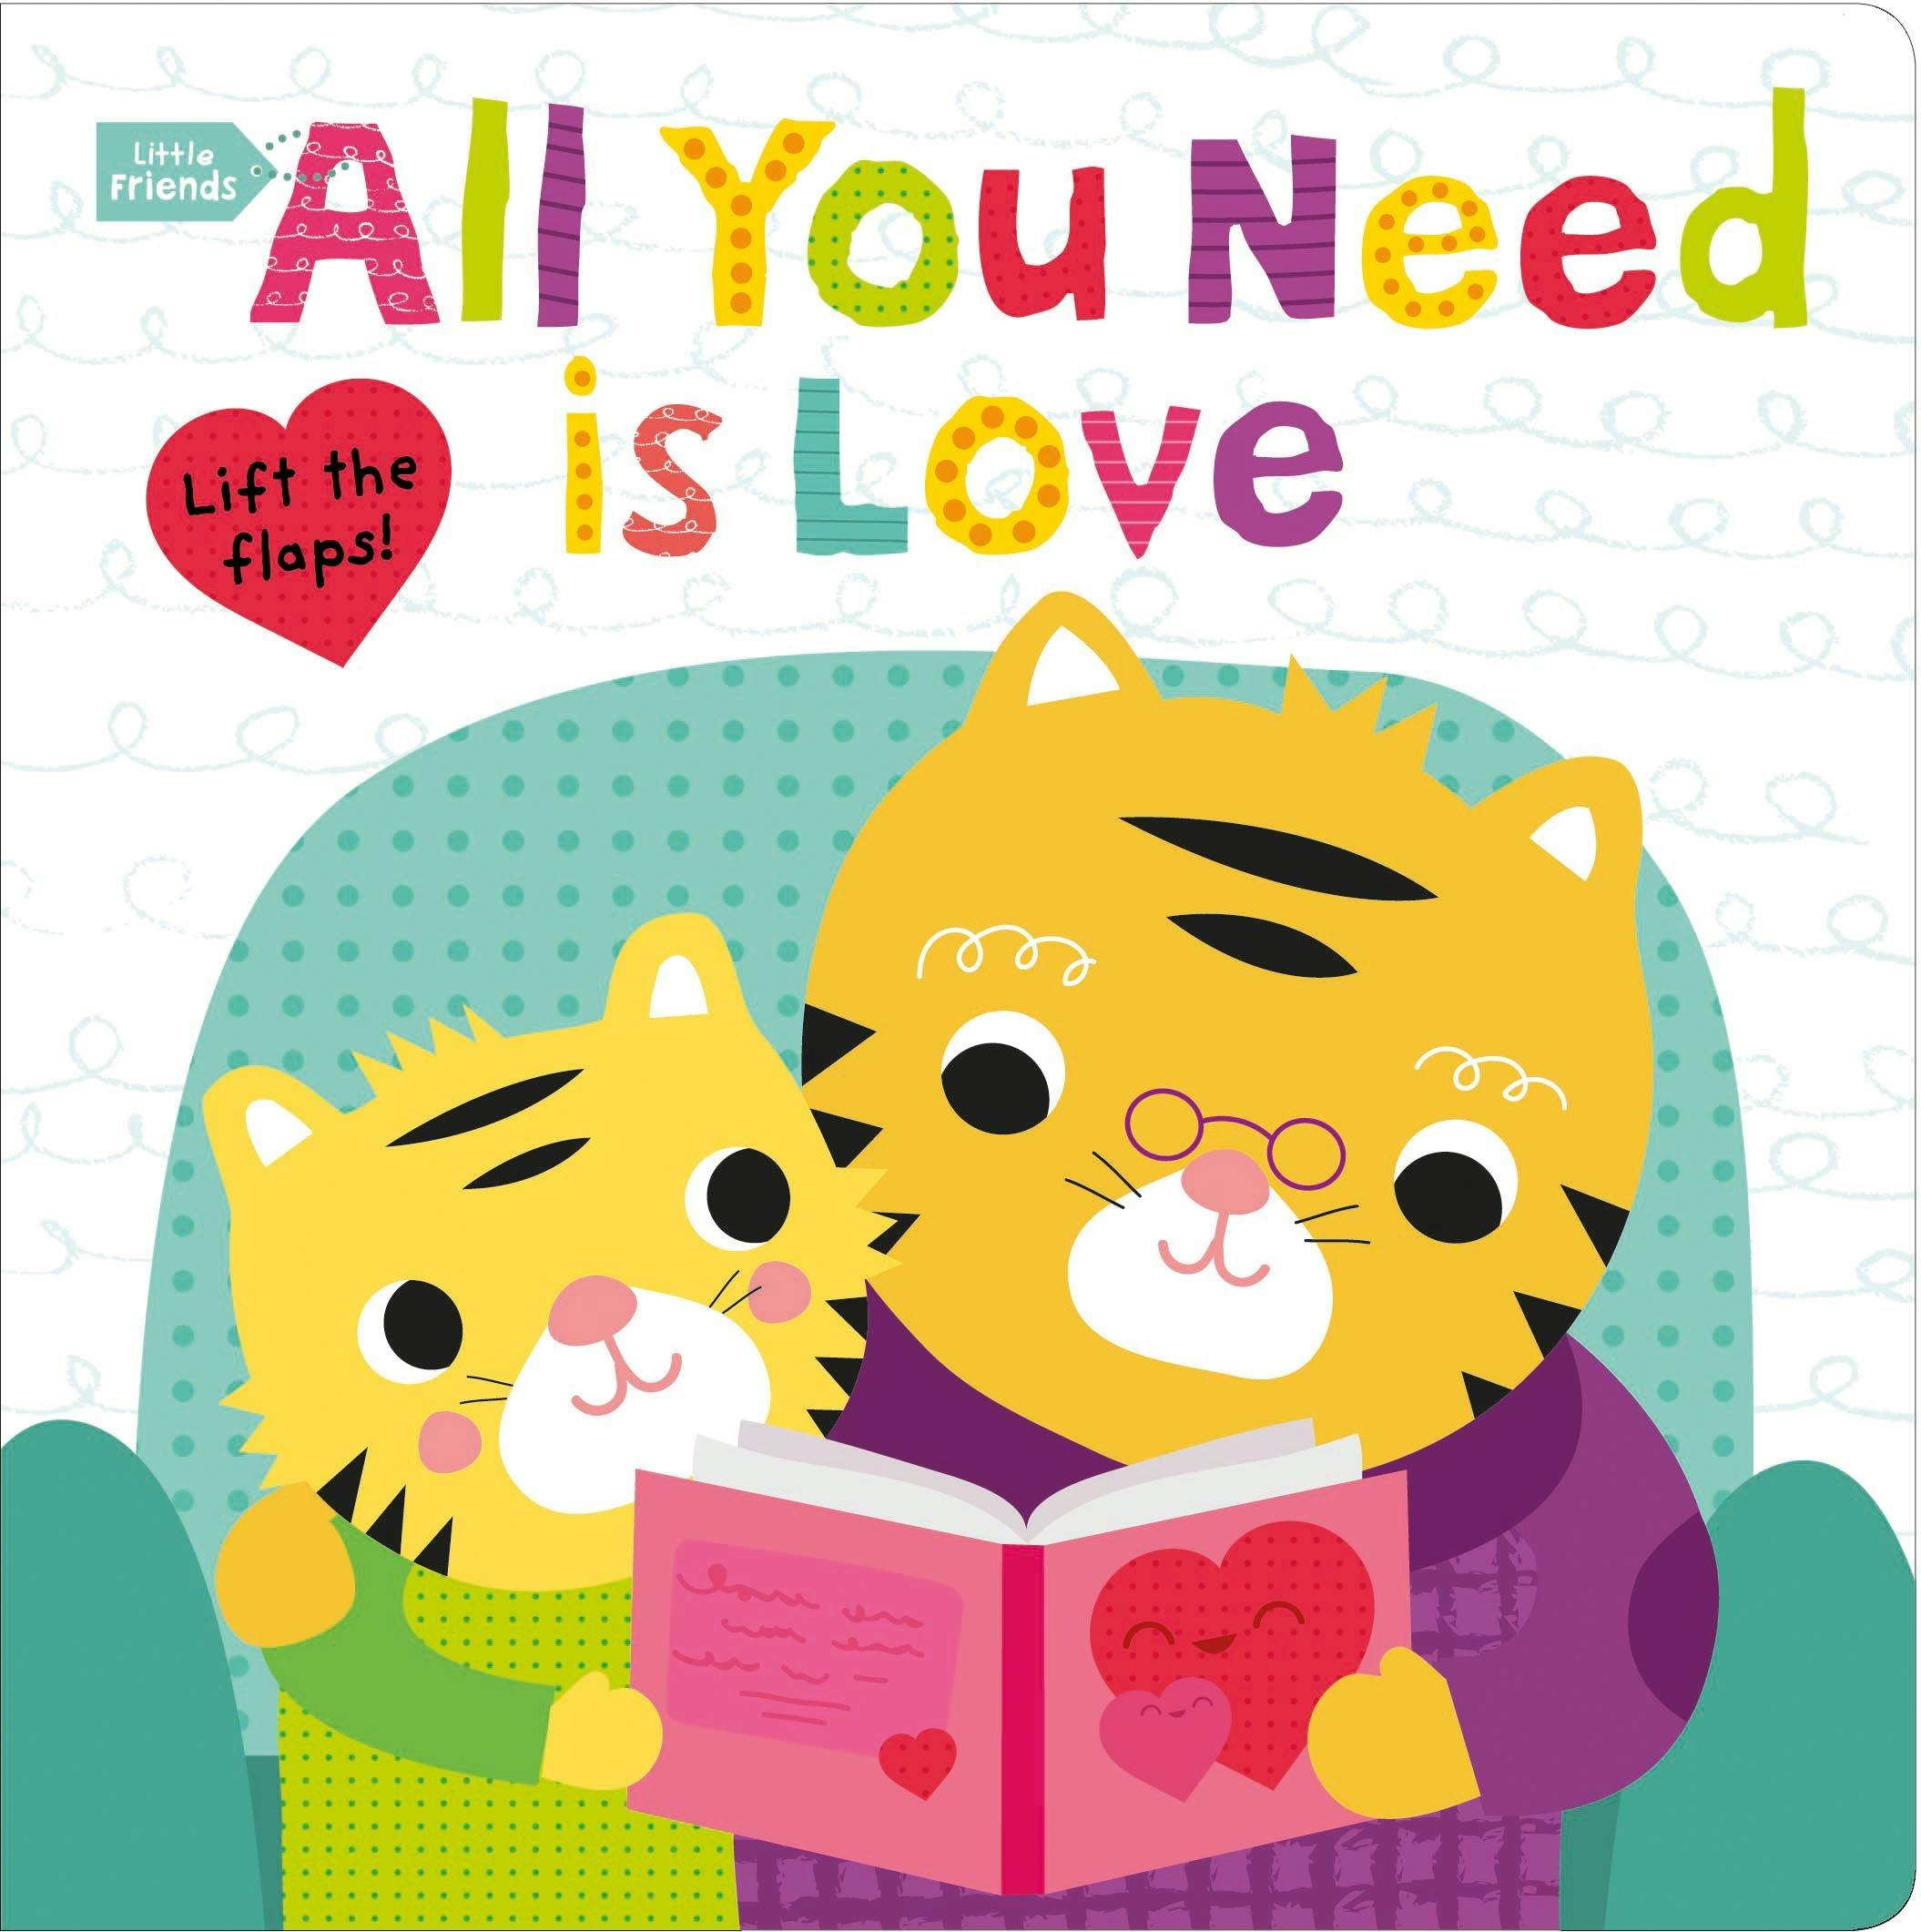 Little friends. All you need is Love. All friends. Little friends Flashcards. Your little friends